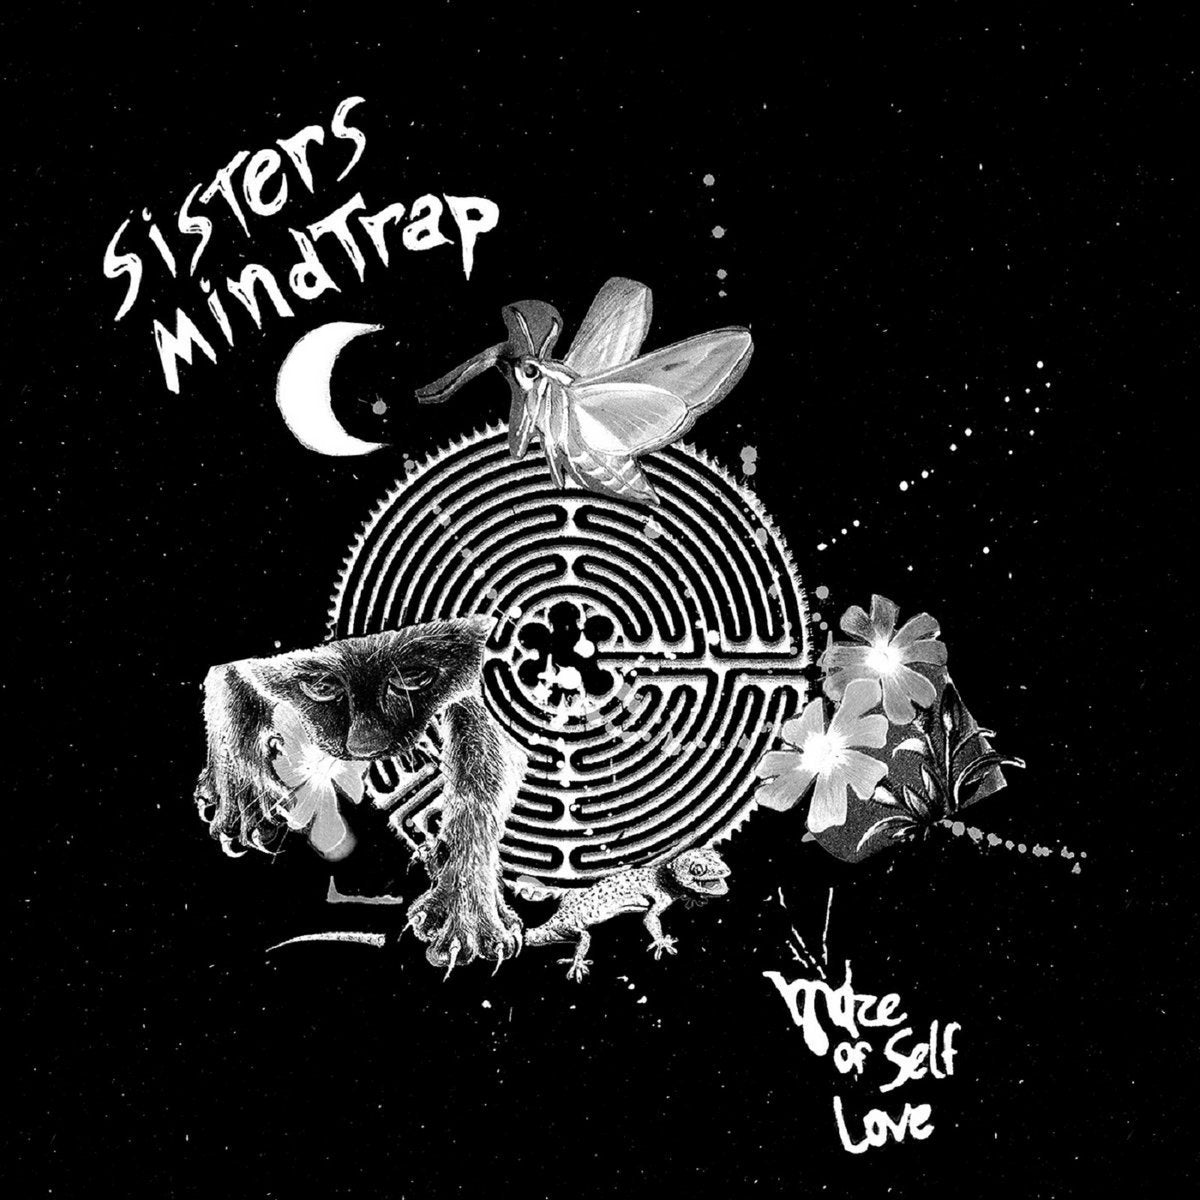 Sisters Mindtrap- Maze of Self Love 7" ~CRAMPS!